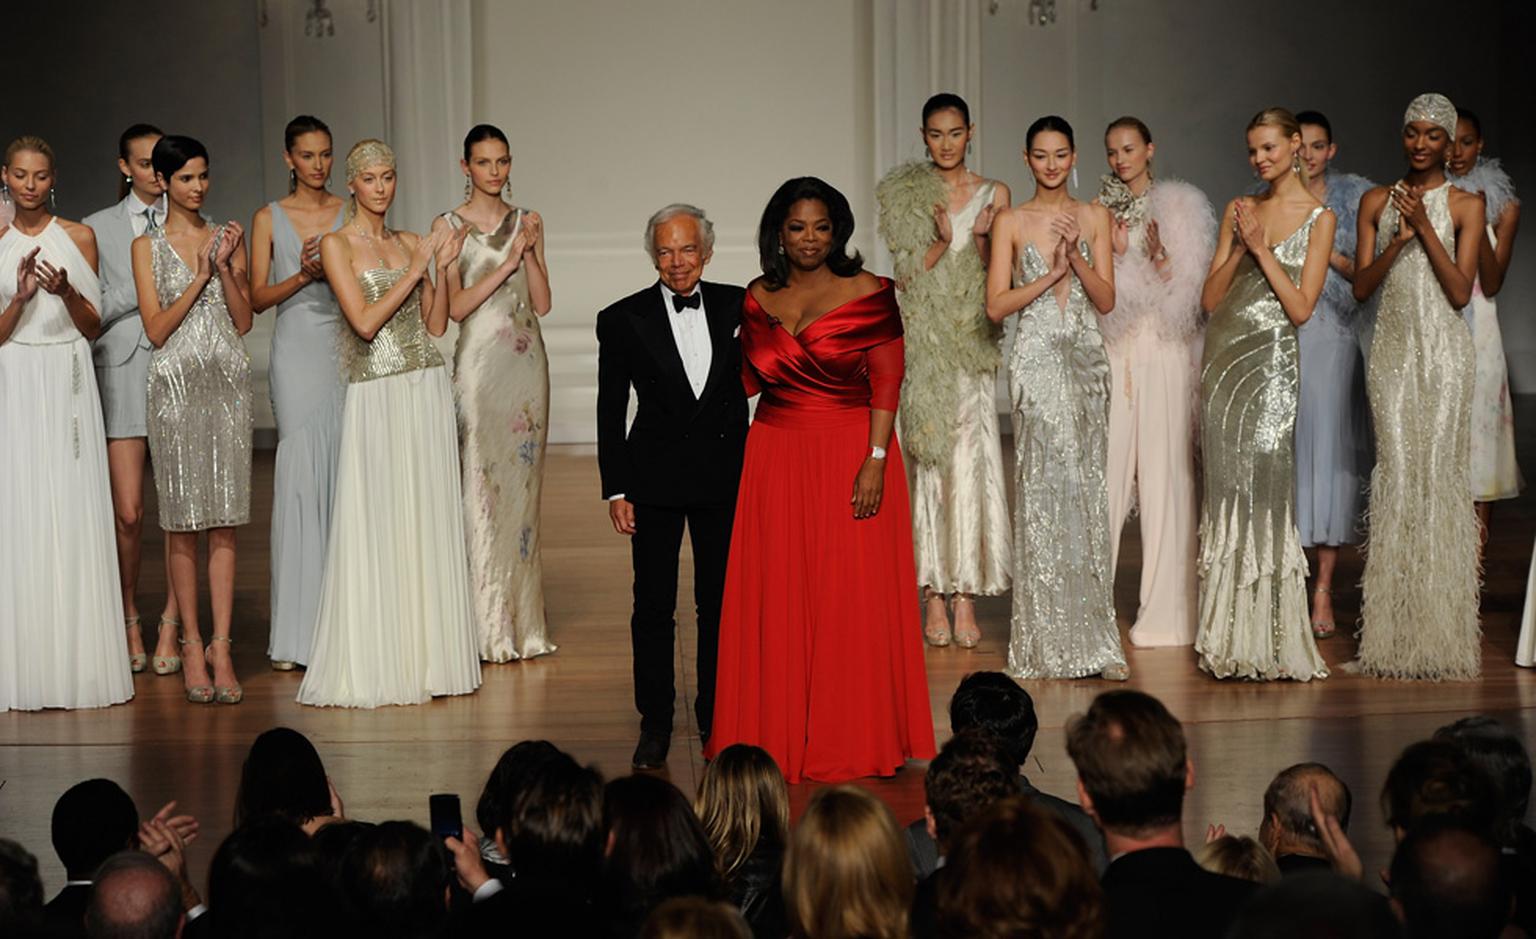 Ralph Lauren and Oprah Winfrey at the Lincoln Centre Fundraiser in New York.